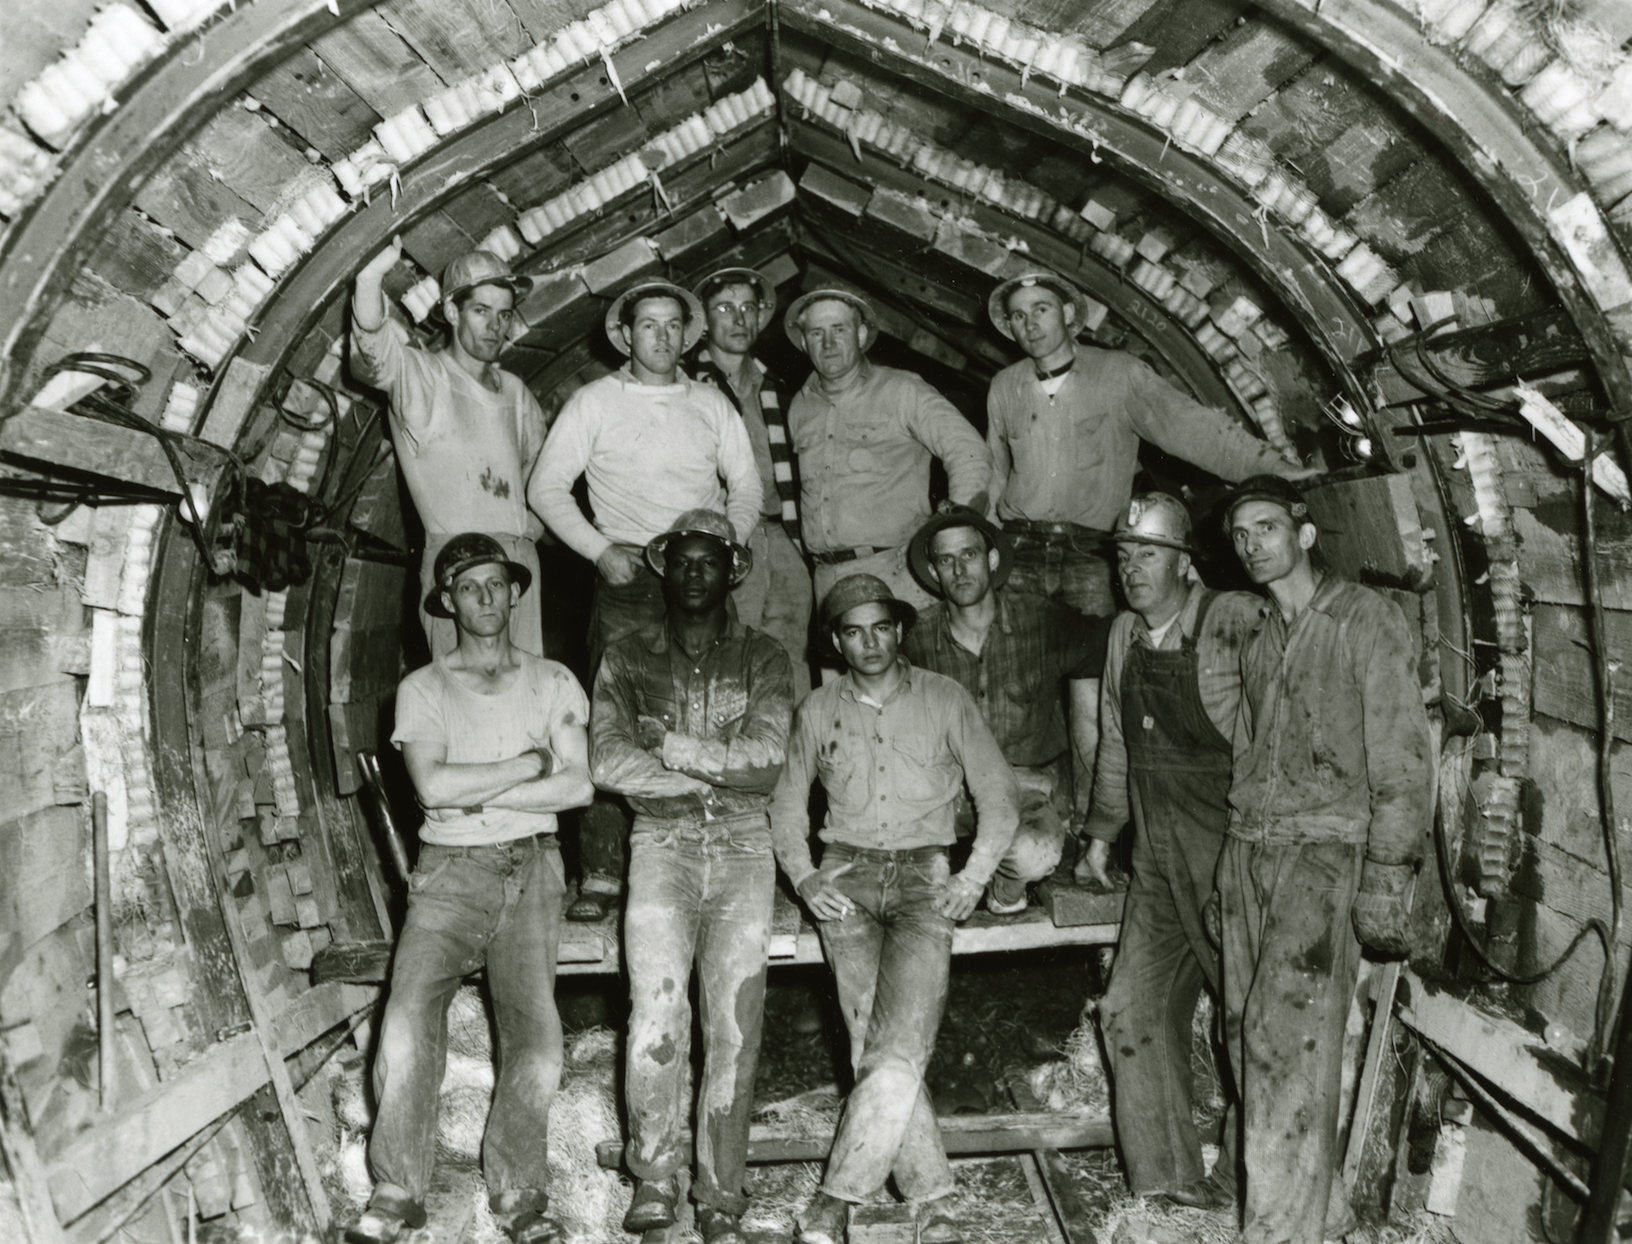 Unidentified workers excavating a section of Portland's sewer tunnels, ca. 1950. City of Portland Archives, A2005-005.59.122.